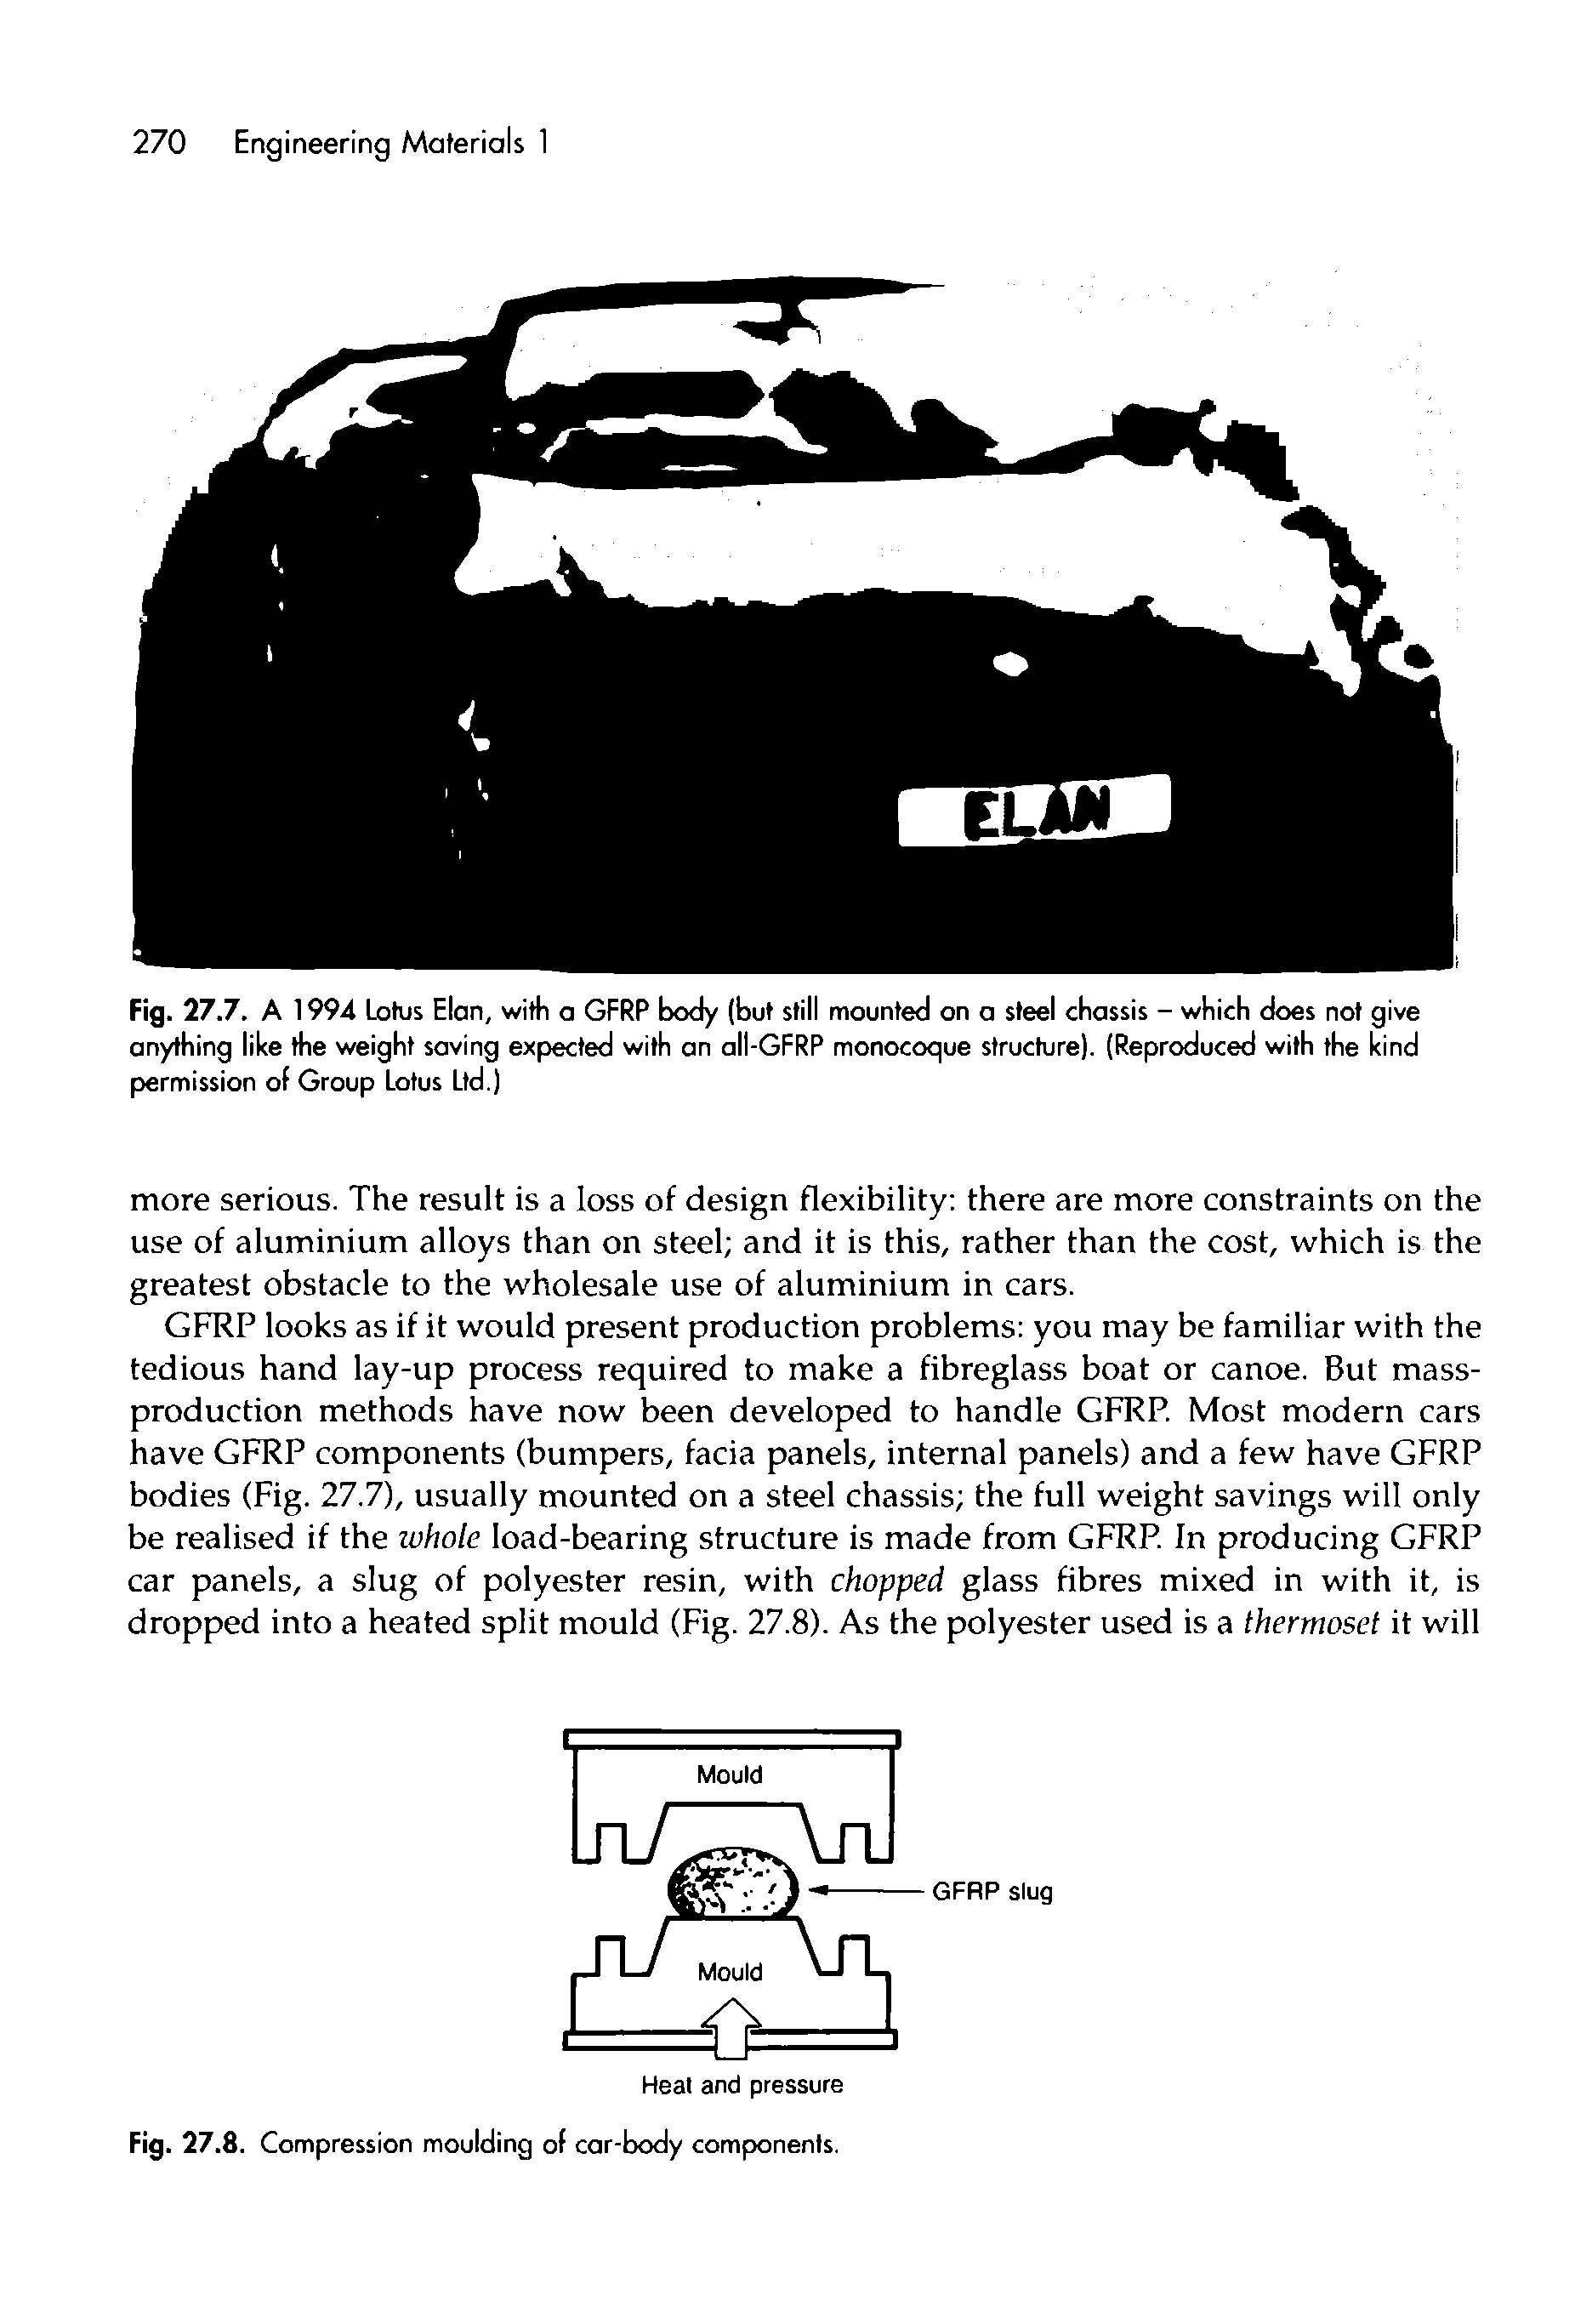 Fig. 27.7. A 1994 Lotus Elan, with a GFRP body (but still mounted on a steel chassis - which does not give anything like the weight saving expected with an all-GFRP monocoque structure). (Reproduced with the kind permission of Group Lotus Ltd.)...